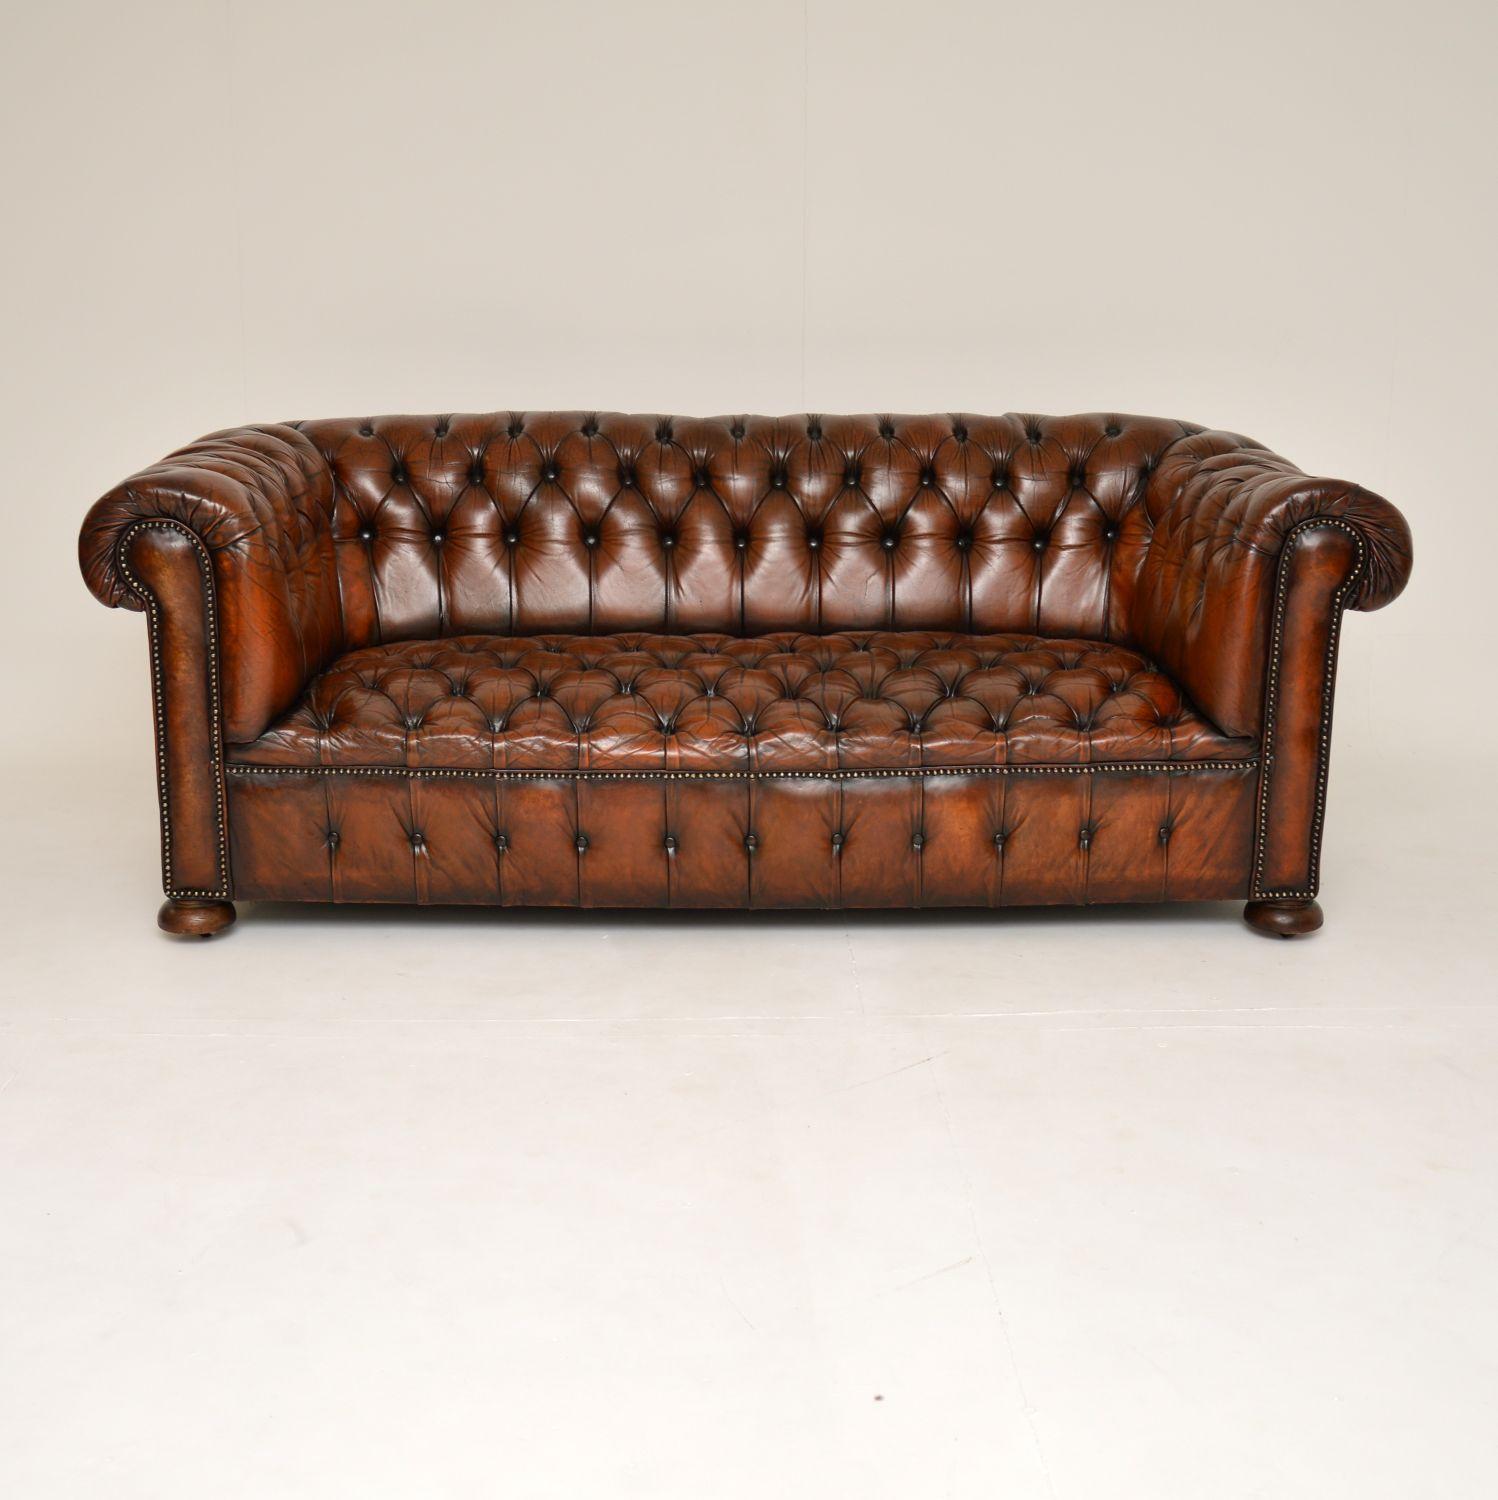 A fabulous antique deep buttoned leather Chesterfield sofa. This was made in England, it dates from around the 1950-60’s.

It is very well made and has a stunning colour tone, having recently been hand coloured and revived by our leather restorer.